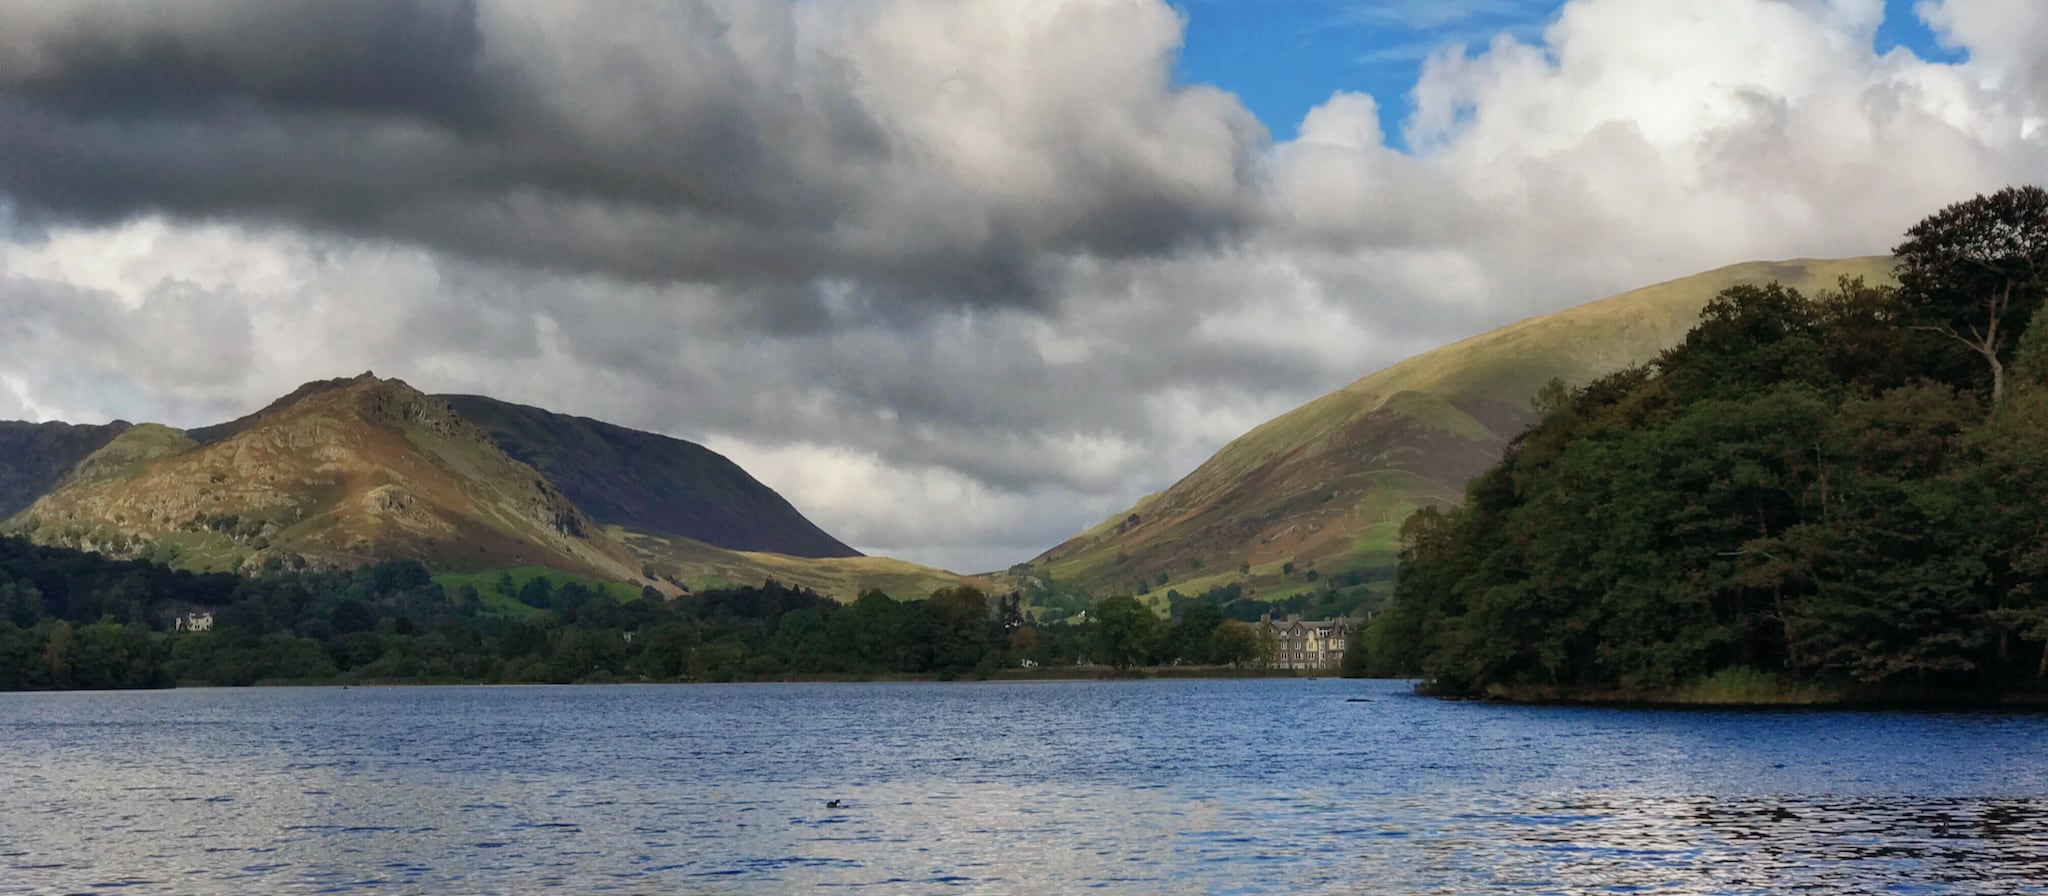 Visiting Grasmere in the Lake District